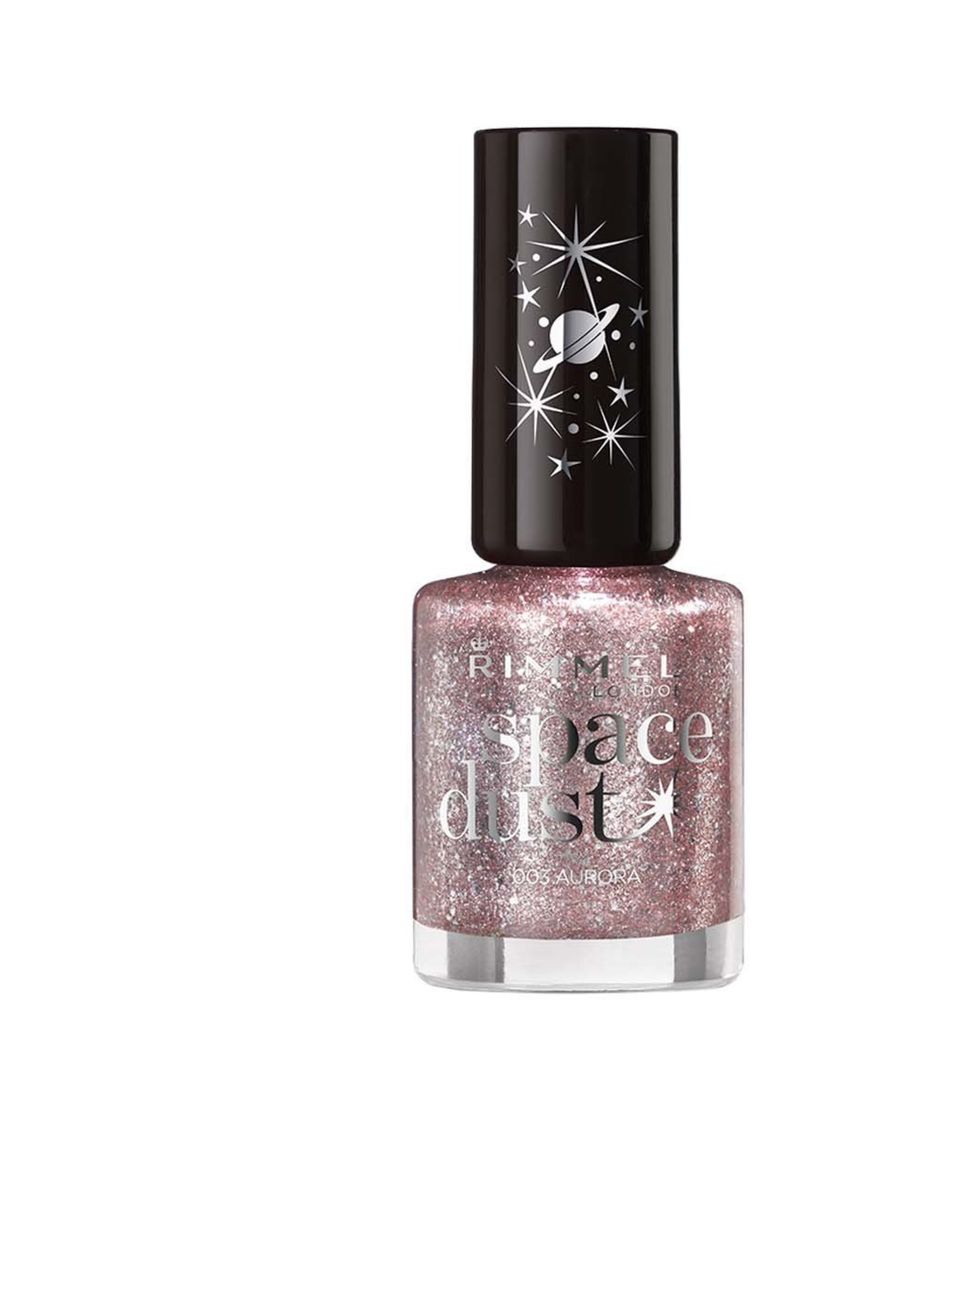 <p>Rimmel Space Dust Nails in Aurora, £3.99, available in October</p>